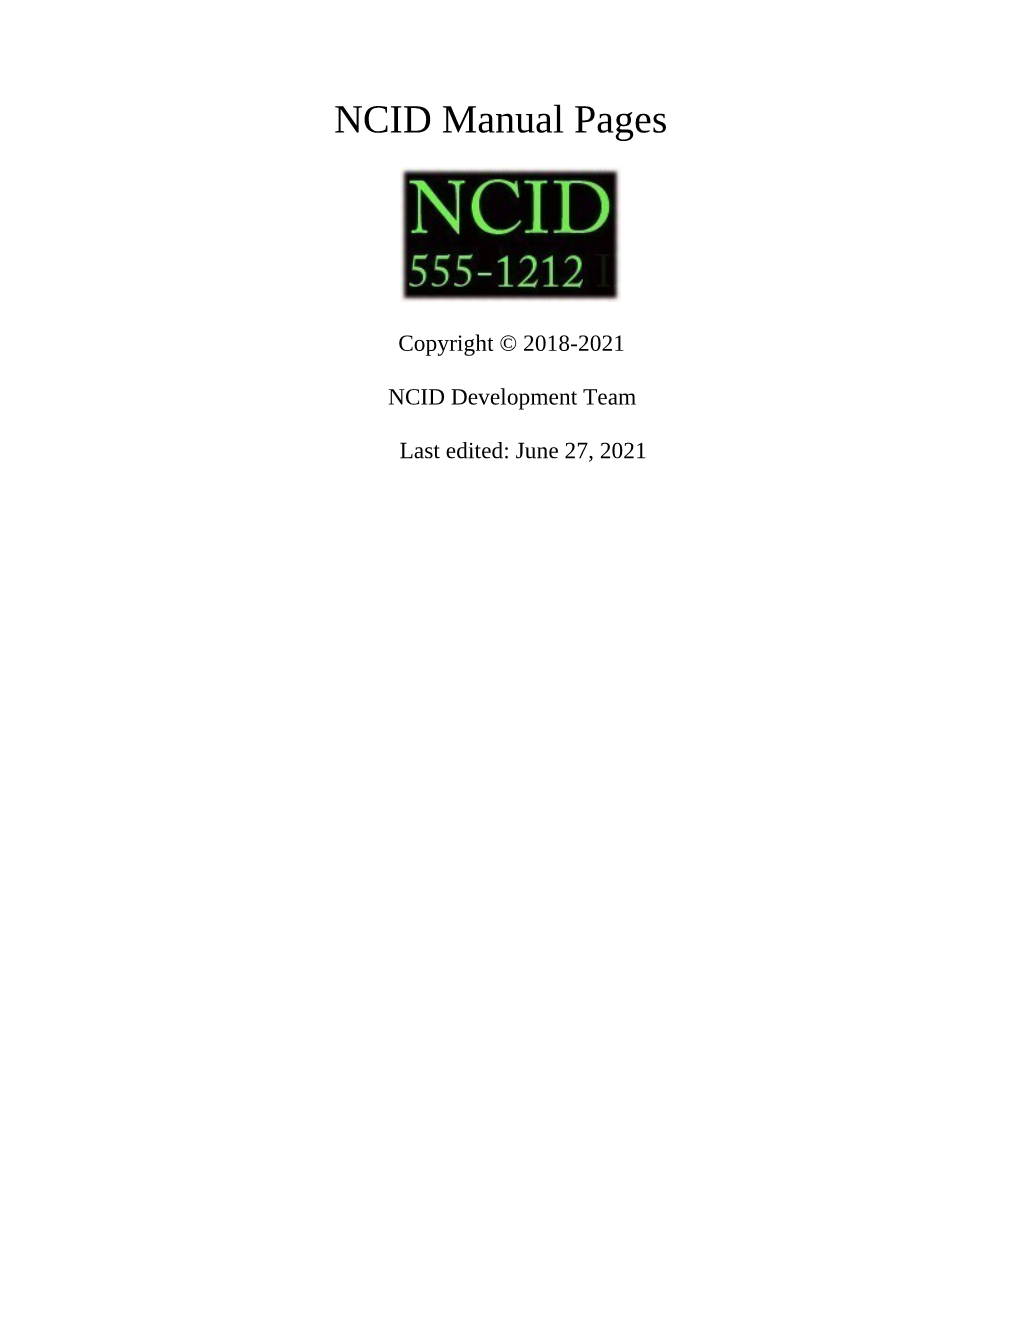 NCID Manual Pages